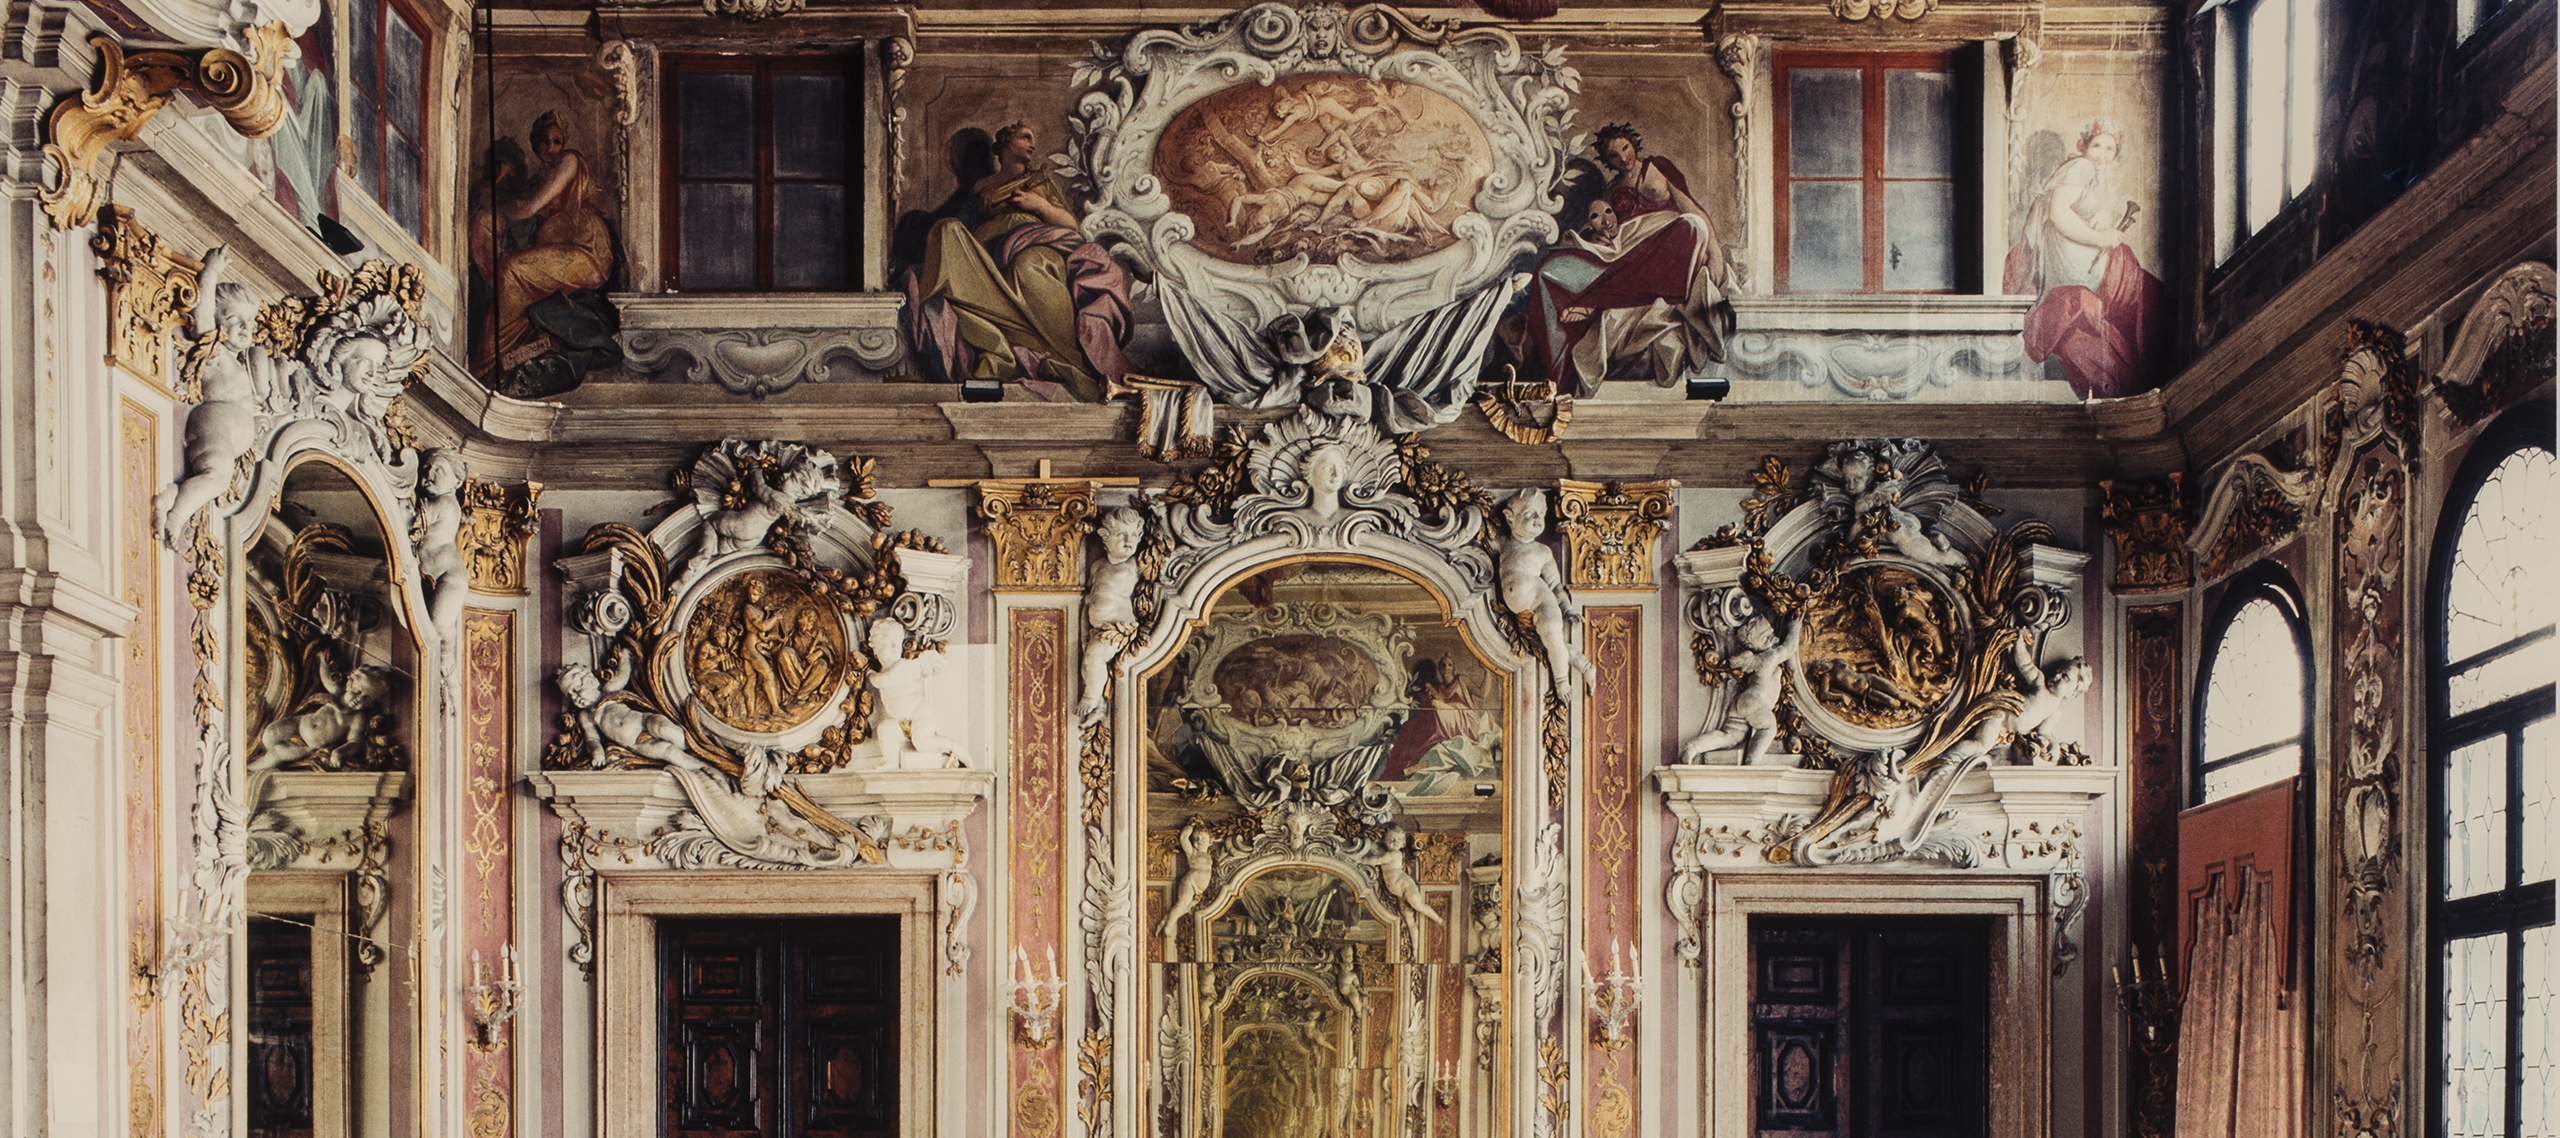 A color photograph of a large, ornate room in a palace. The expansive floor is bare and empty. At the other end of the room, a large ornate mirror hangs between two dark wooden doors. The moldings and details above the doors and mirror are extravagantly designed and a dramatic mural is featured at the very top of the wall. In the mirror, a small figure is seen, seemingly the photographer.